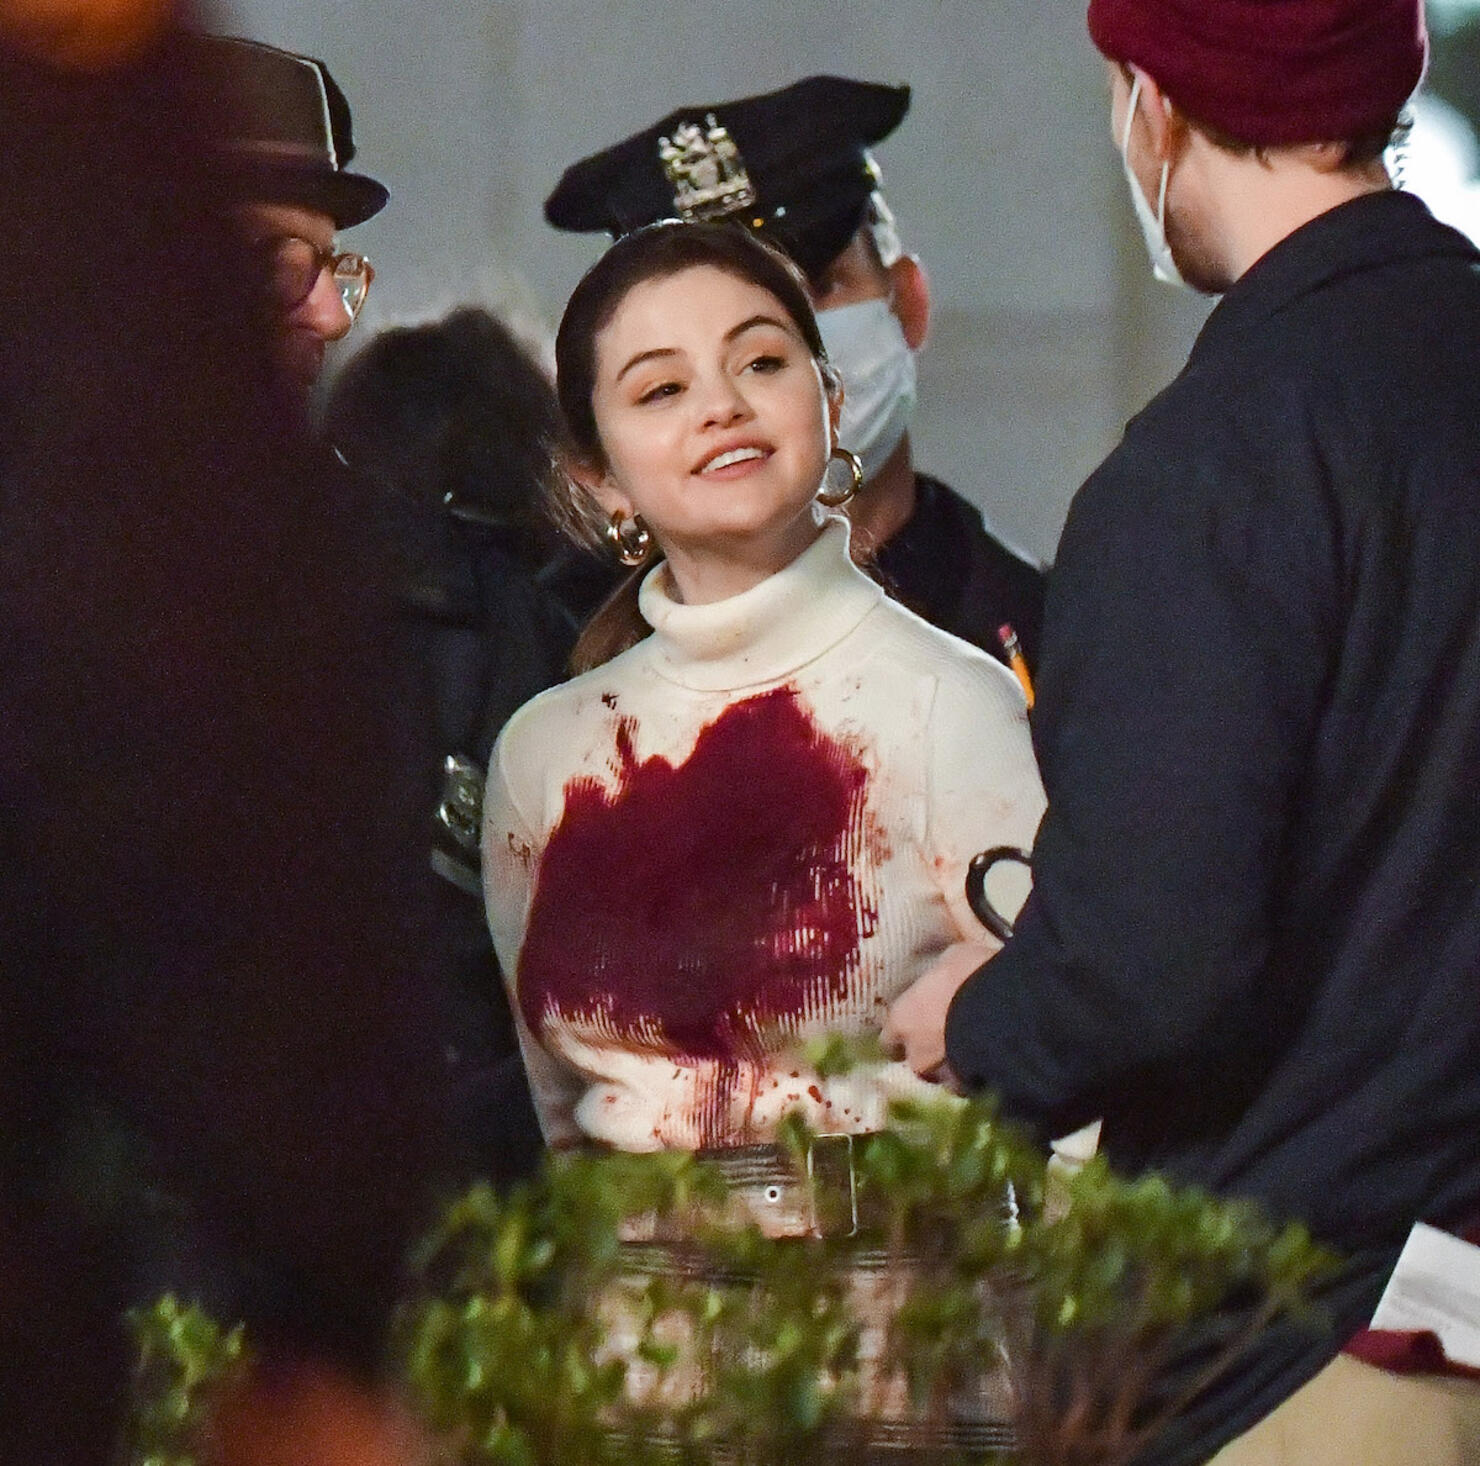 Selena Gomez Appears Distressed, Bloodstained In Gory Scene For TV Series.